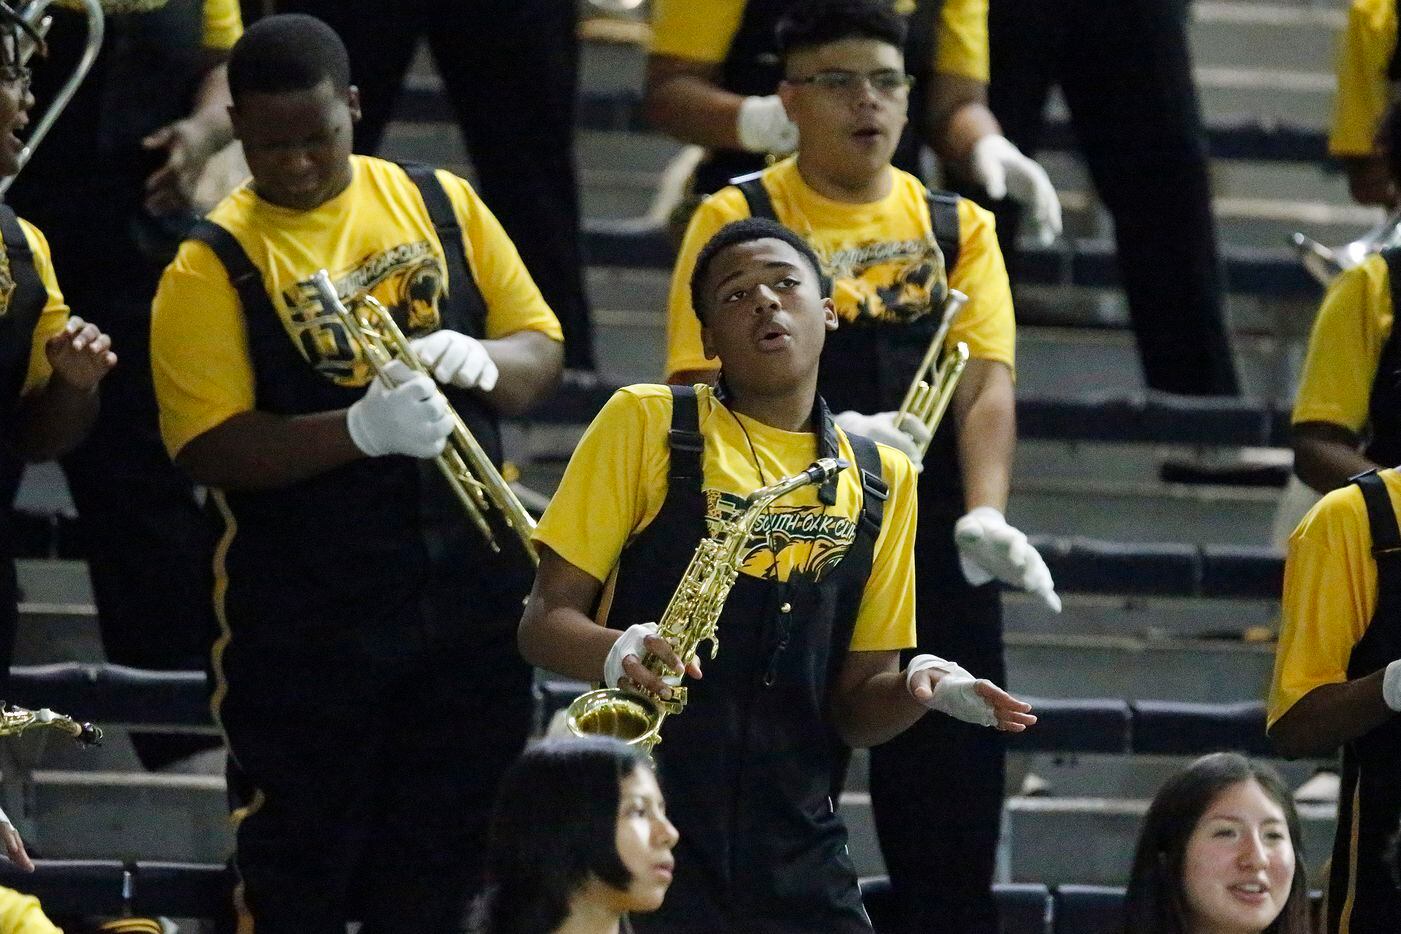 The South Oak Cliff High School band was coasting on a big lead during the first half as South Oak Cliff High School played Lovejoy High School in the Class 5A Divison II Region II final playoff game at Ford Center in Frisco on Saturday, December 4, 2021. (Stewart F. House/Special Contributor)